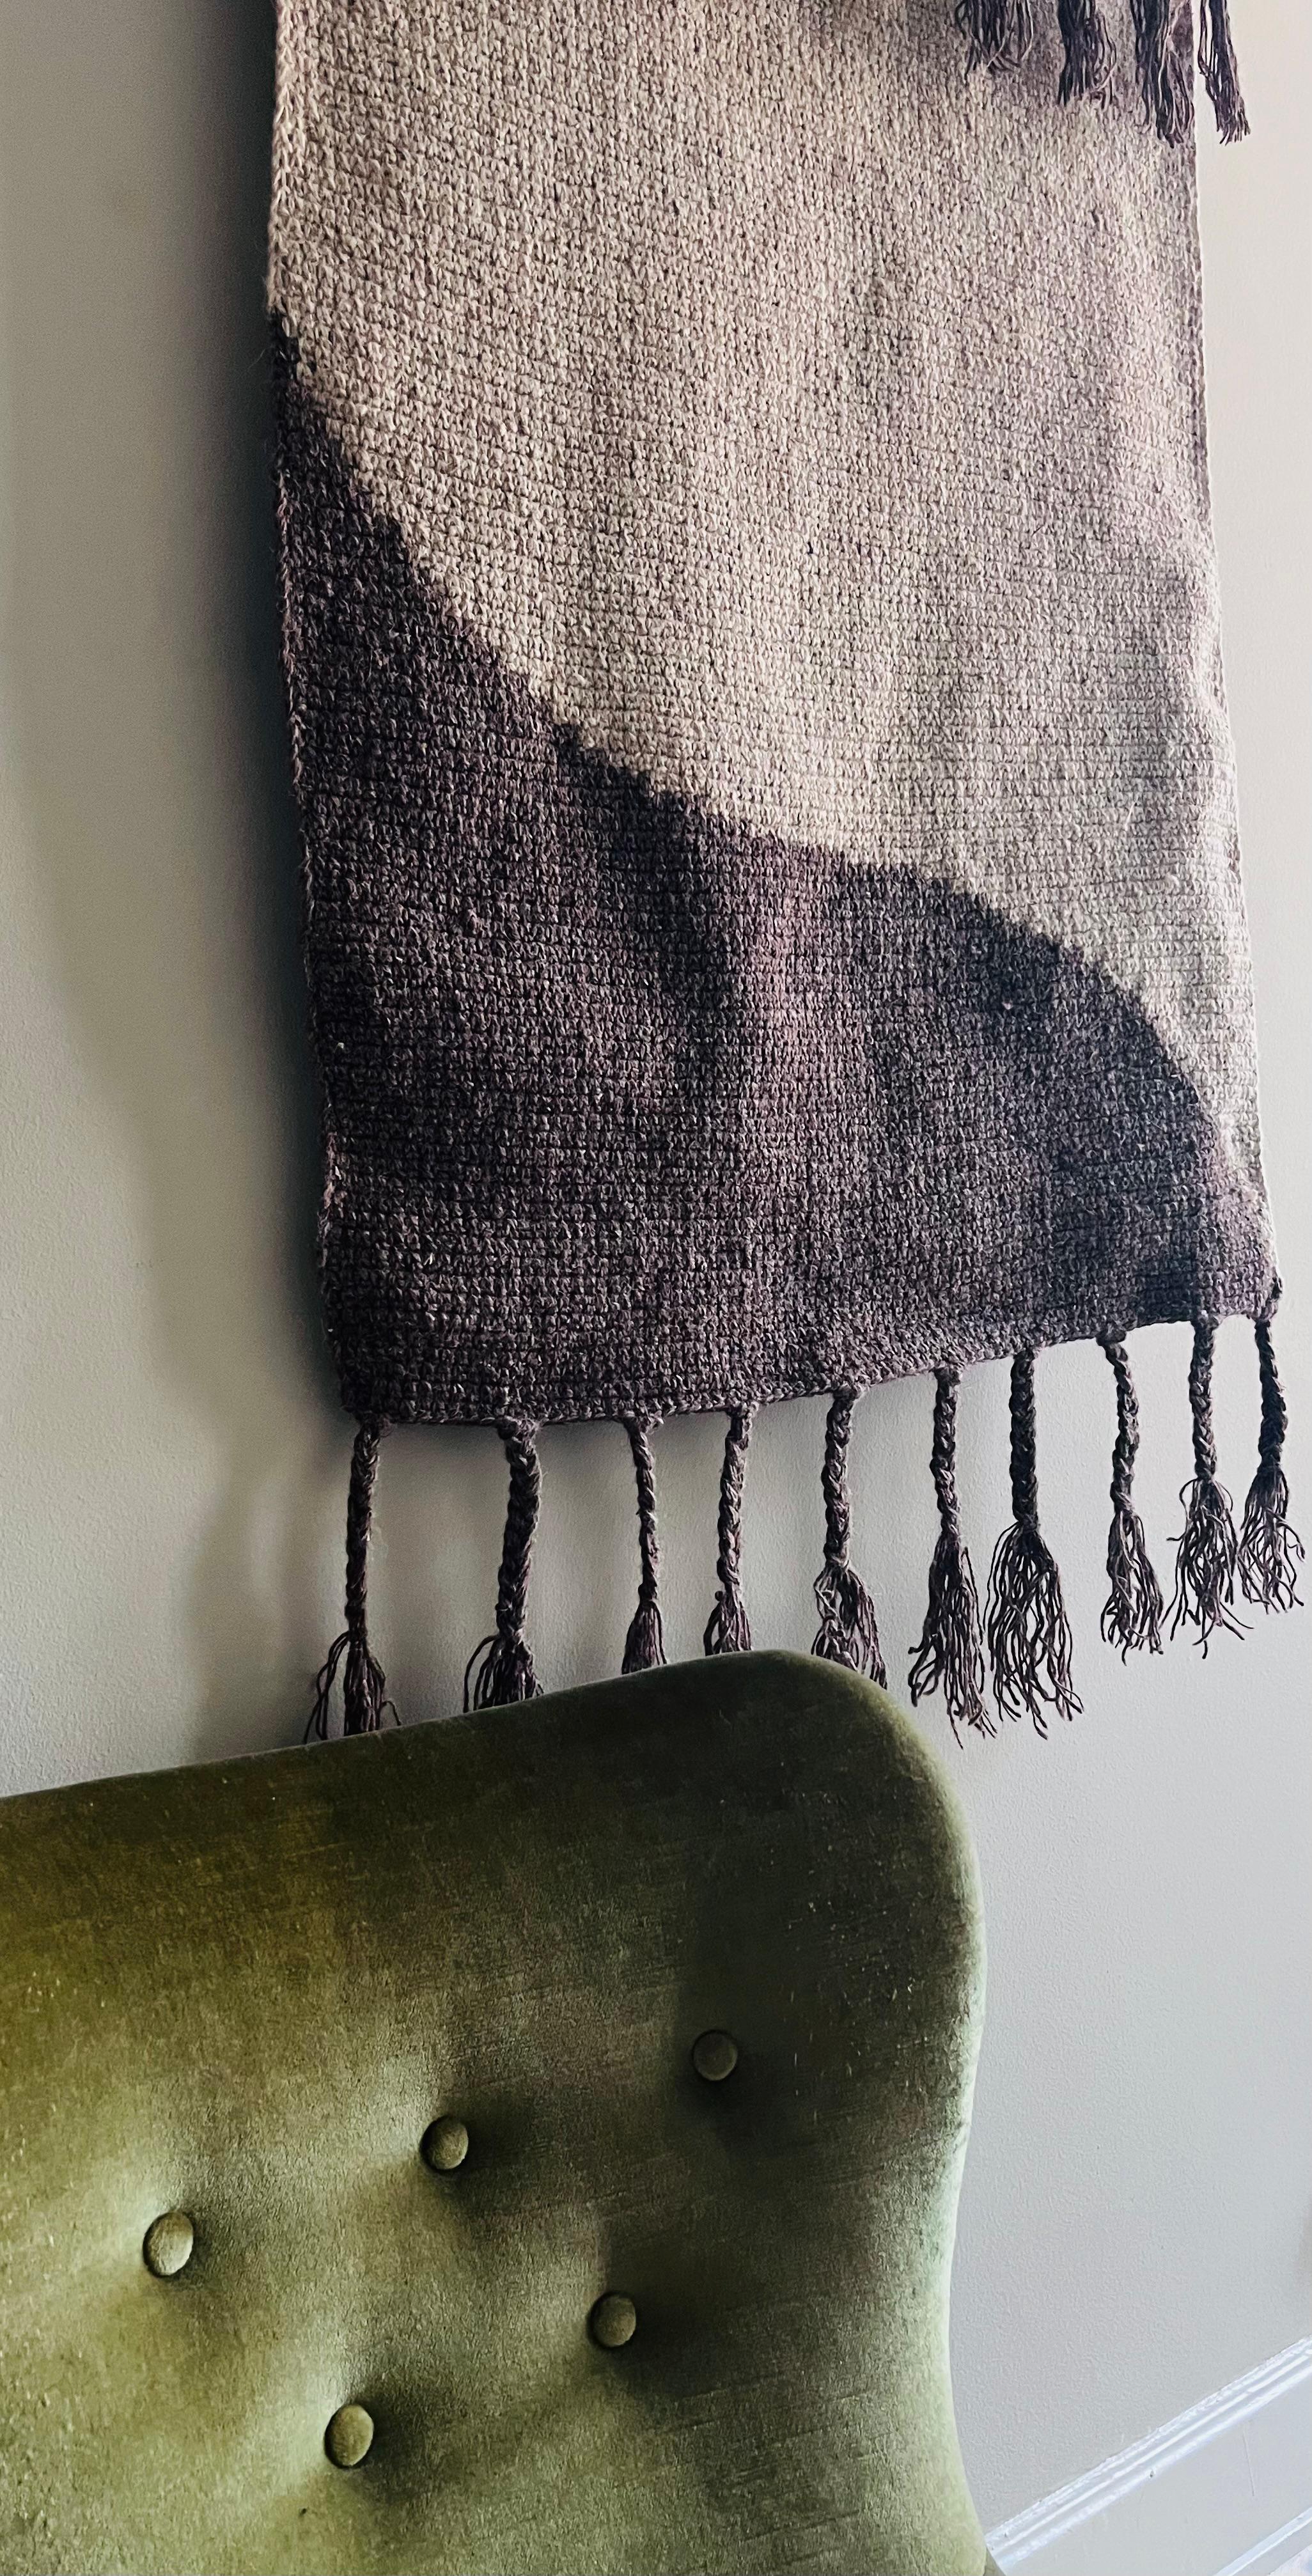 For the autumn season, Anna Charlotte Atelier will introduce a new collection, ROOTS, made from recycled natural yarns such as wool, hemp, and bamboo silk dyed in botanical colours during Paris Design Week. 

Anna Charlotte Ateliers’ earthy